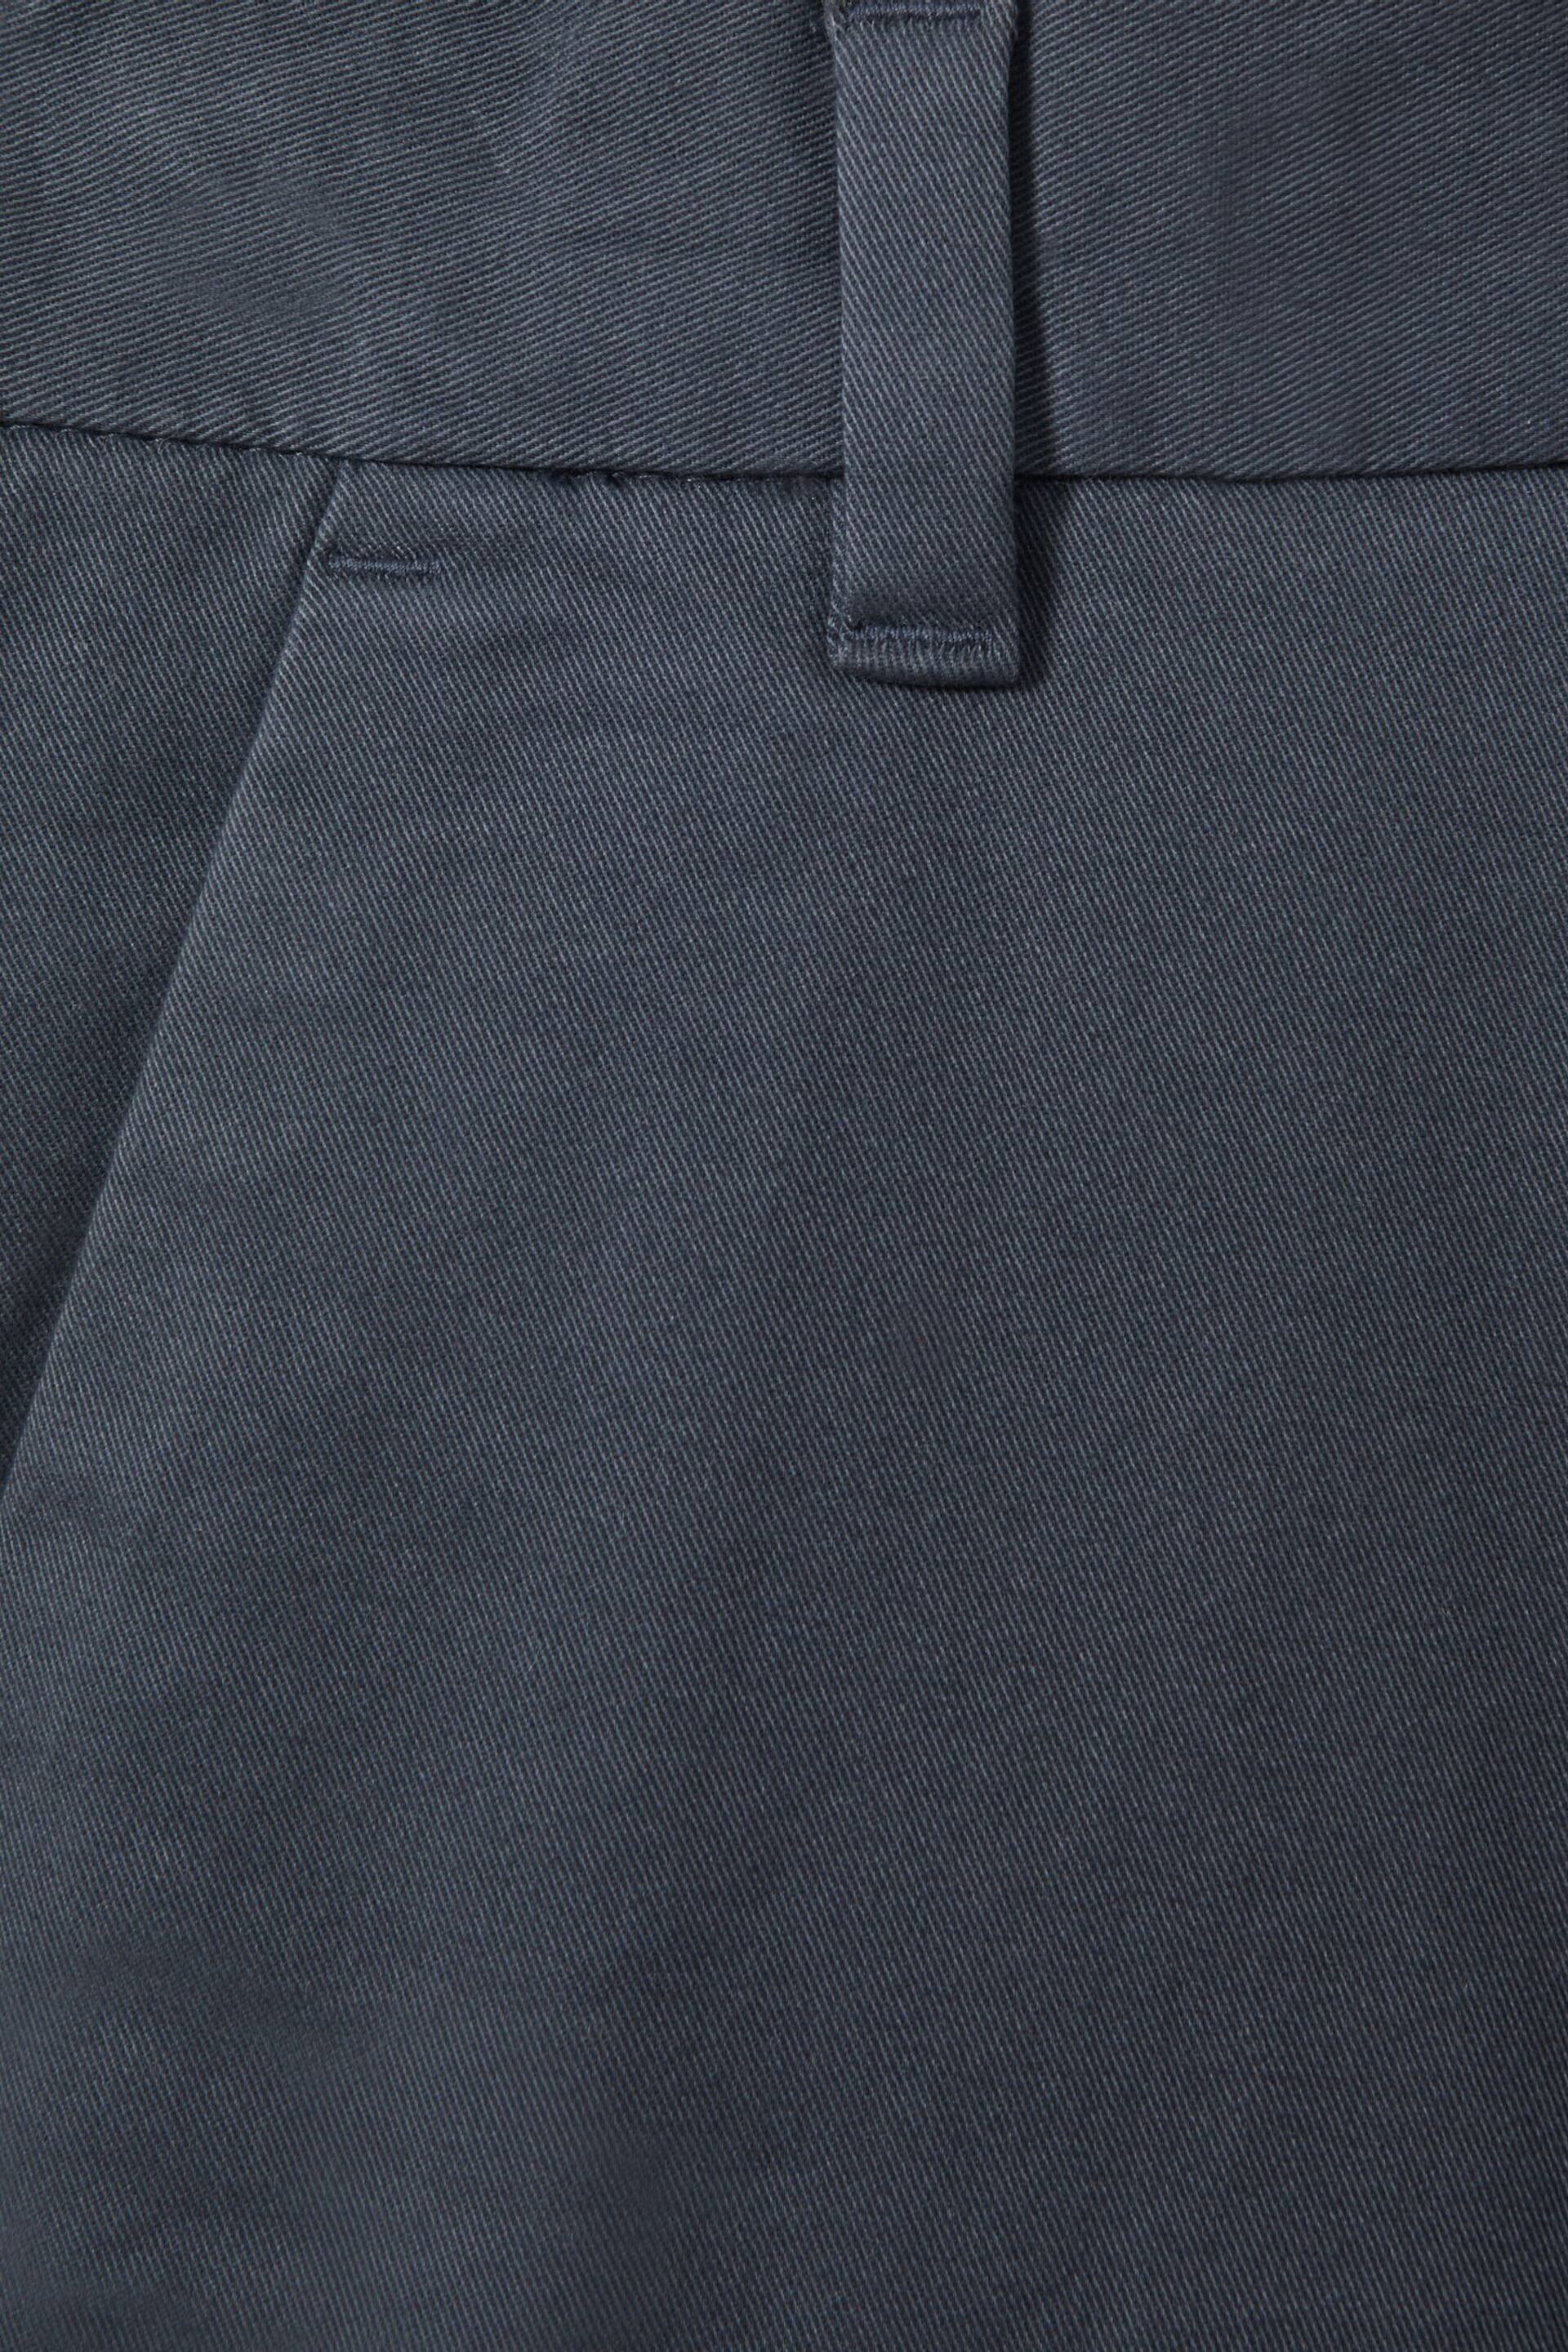 Reiss Airforce Blue Wicket Junior Casual Chino Shorts - Image 4 of 4